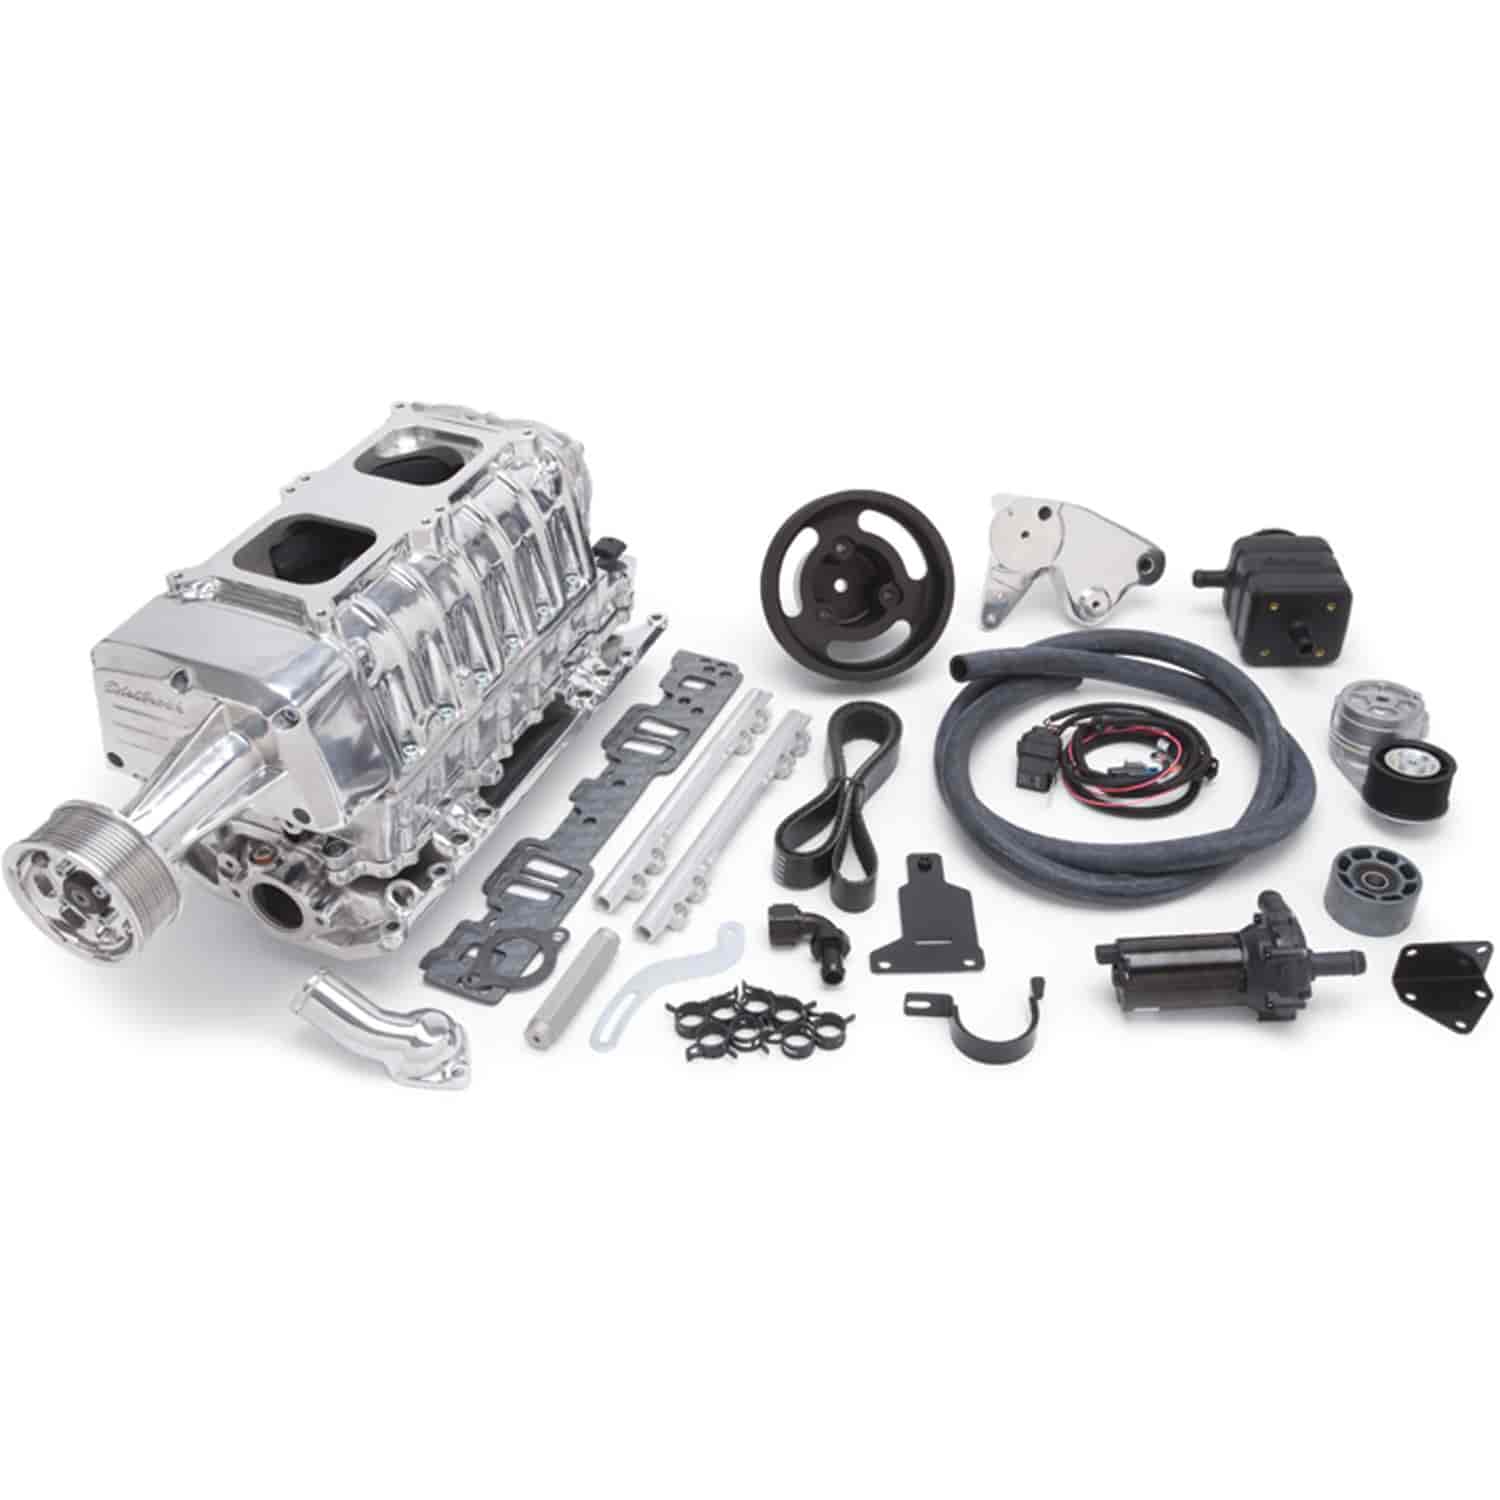 E-Force Enforcer RPM EFI Polished Supercharger Kit for 1955-1986 Small Block Chevy with Vortec Heads